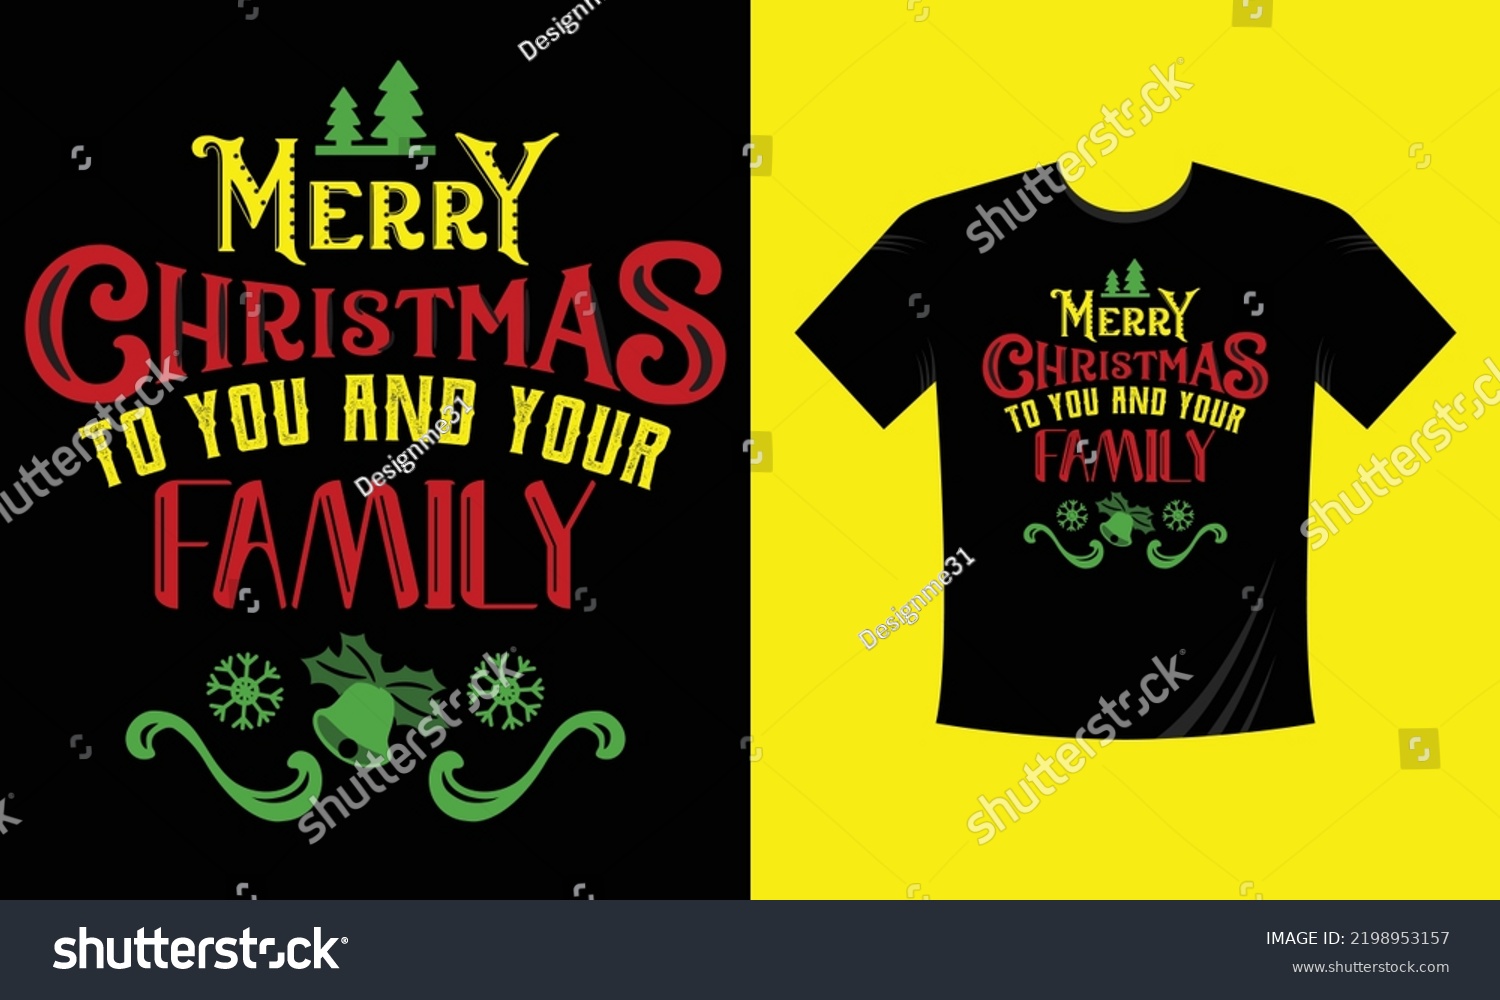 SVG of merry Christmas to you and your family - t shirt design free vector svg design template  svg